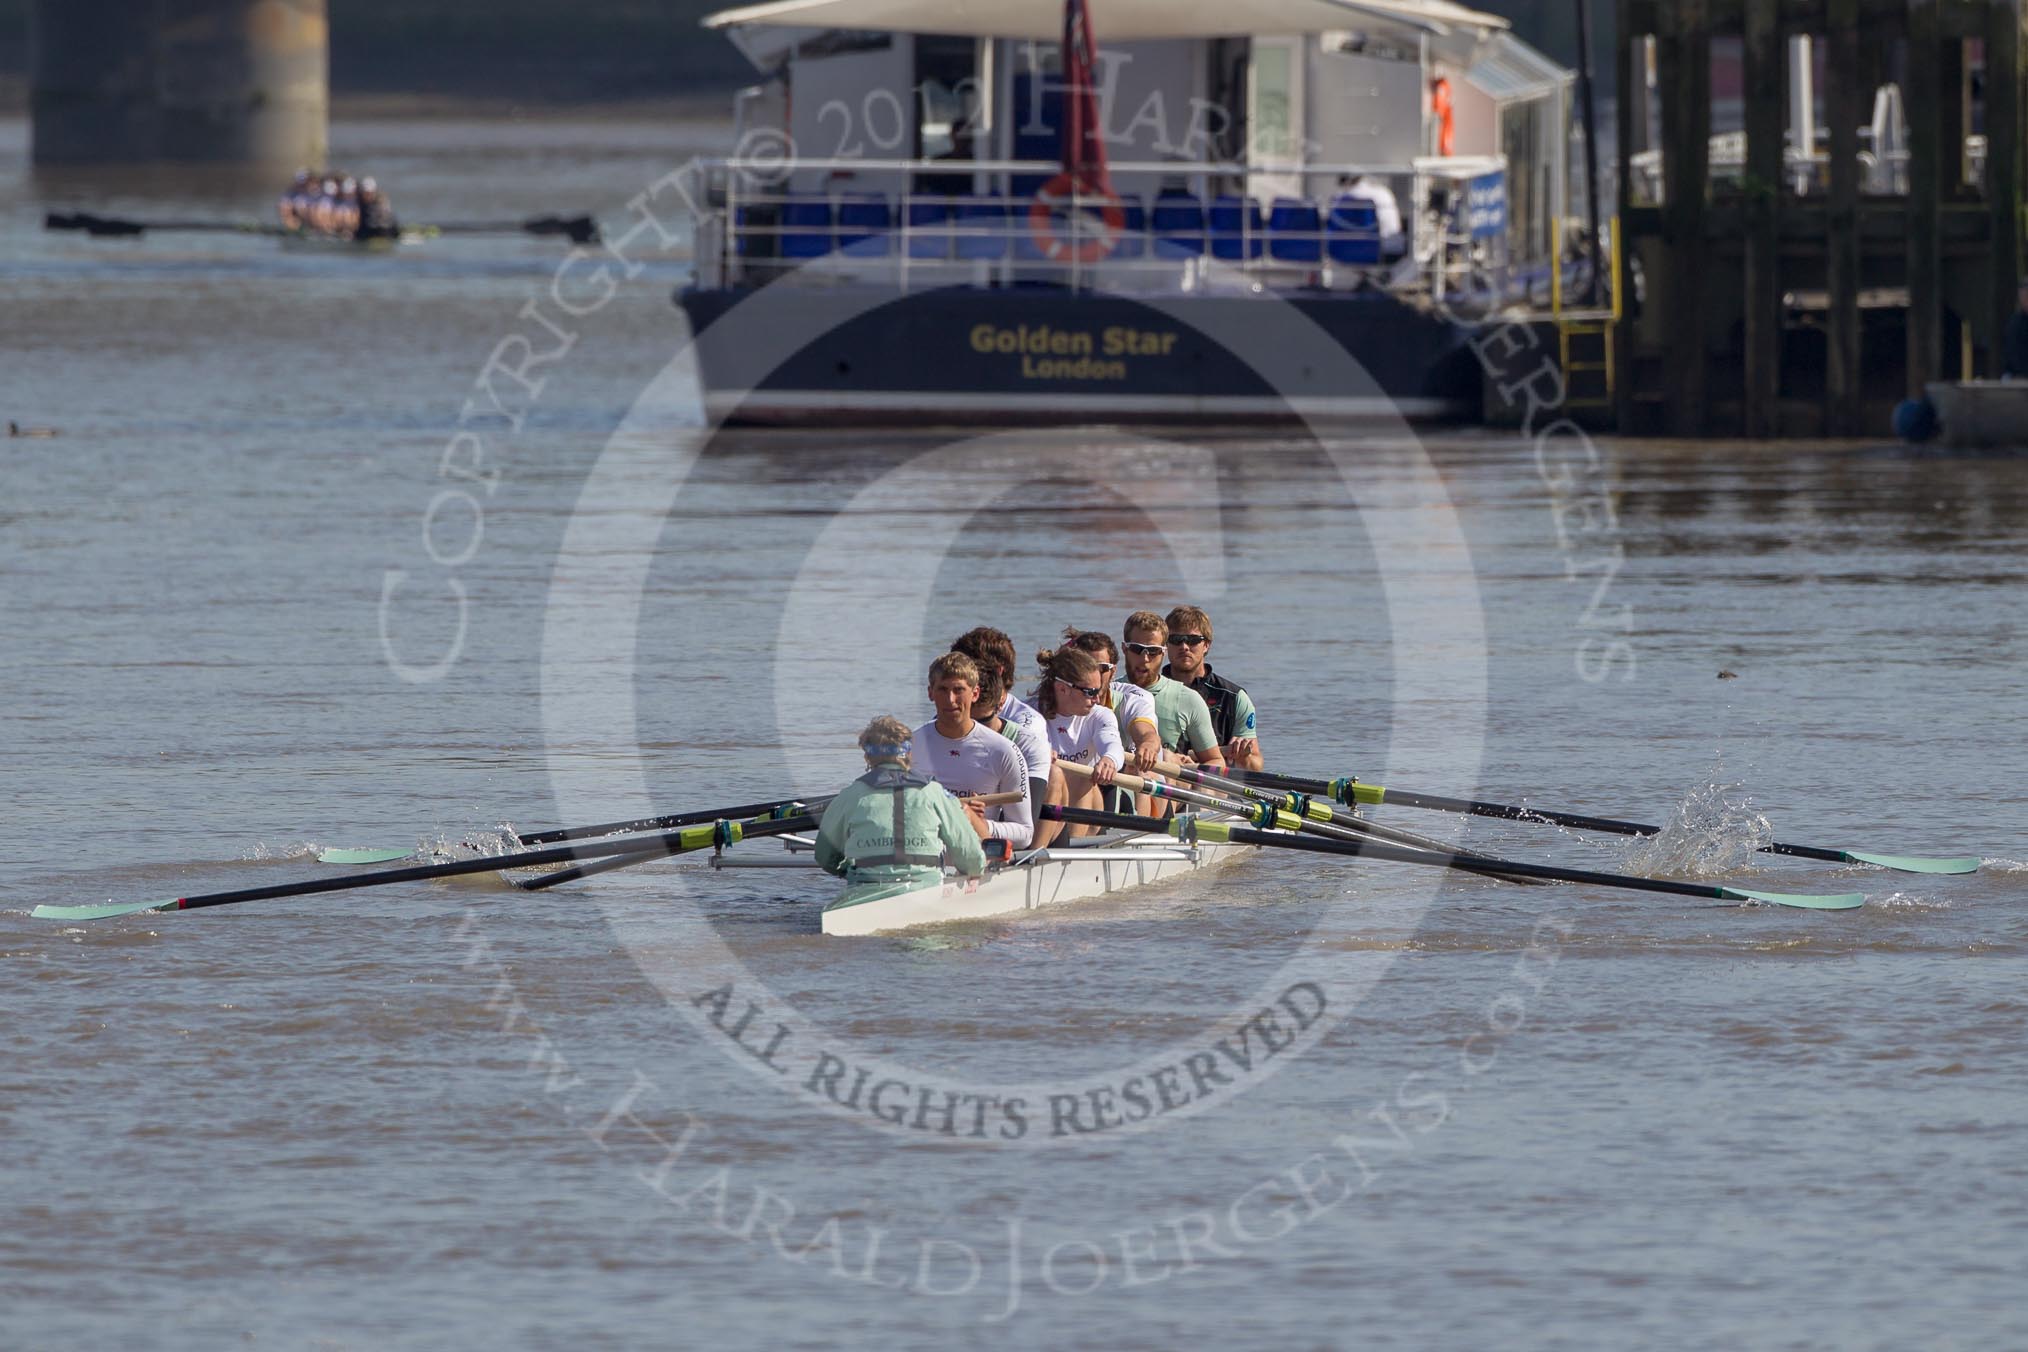 The Boat Race season 2012 - fixture CUBC vs Molesey BC: The CUBC Blue Boat getting ready to race Molesey BC - cox Ed Bosson, stroke Niles Garratt, Alexander Scharp, Steve Dudek, Mike Thorp, Alex Ross, Jack Lindeman, Moritz Schramm, and bow David Nelson, rowing towards Putney Bridge and Putney Pier..




on 25 March 2012 at 14:43, image #32